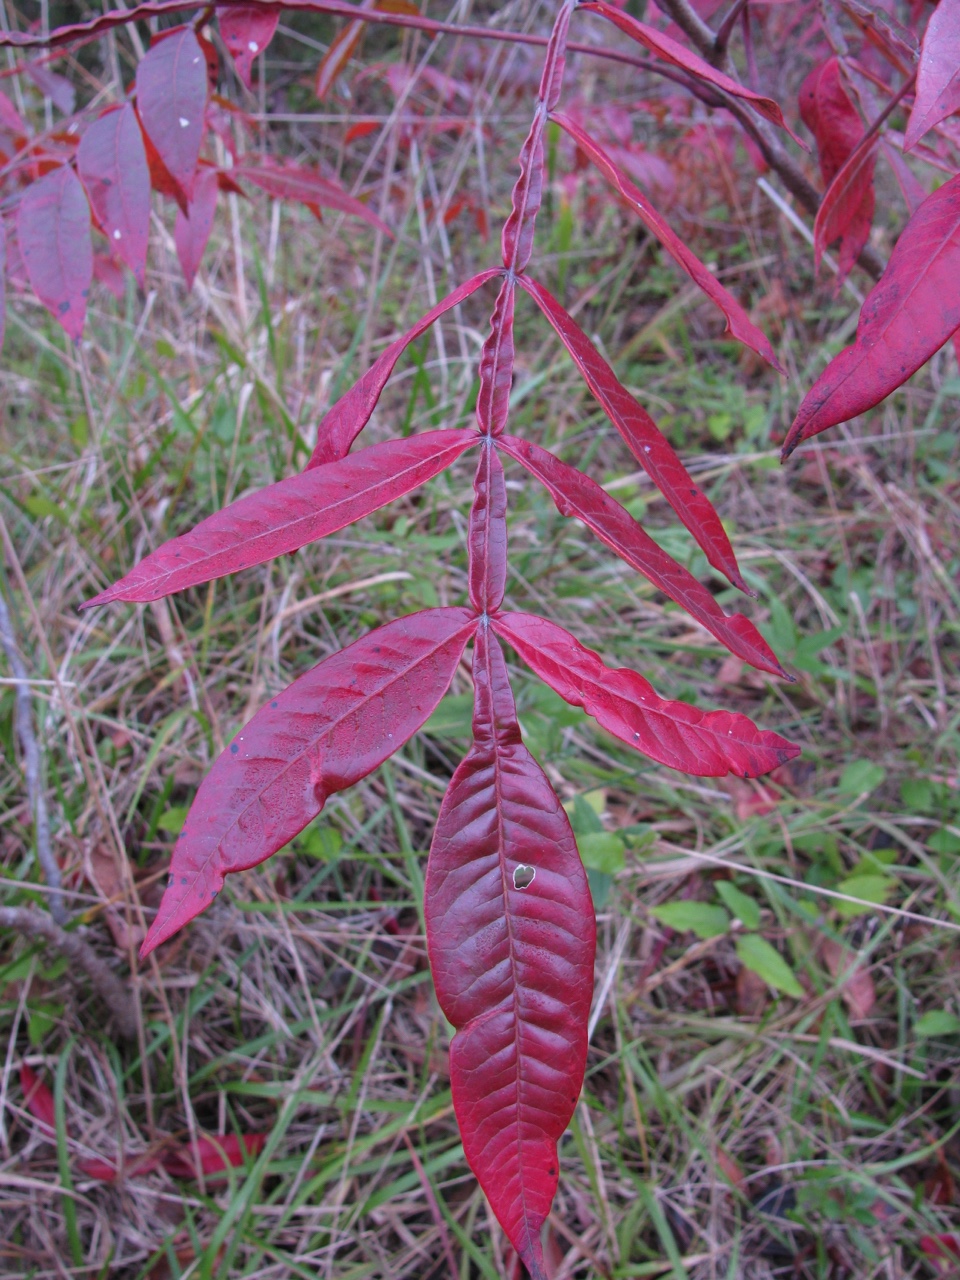 The Scientific Name is Rhus copallinum [= Rhus copallina]. You will likely hear them called Winged Sumac, Shining Sumac, Flameleaf Sumac, Dwarf Sumac. This picture shows the Close-up of pinnately compound leaf in Fall of Rhus copallinum [= Rhus copallina]